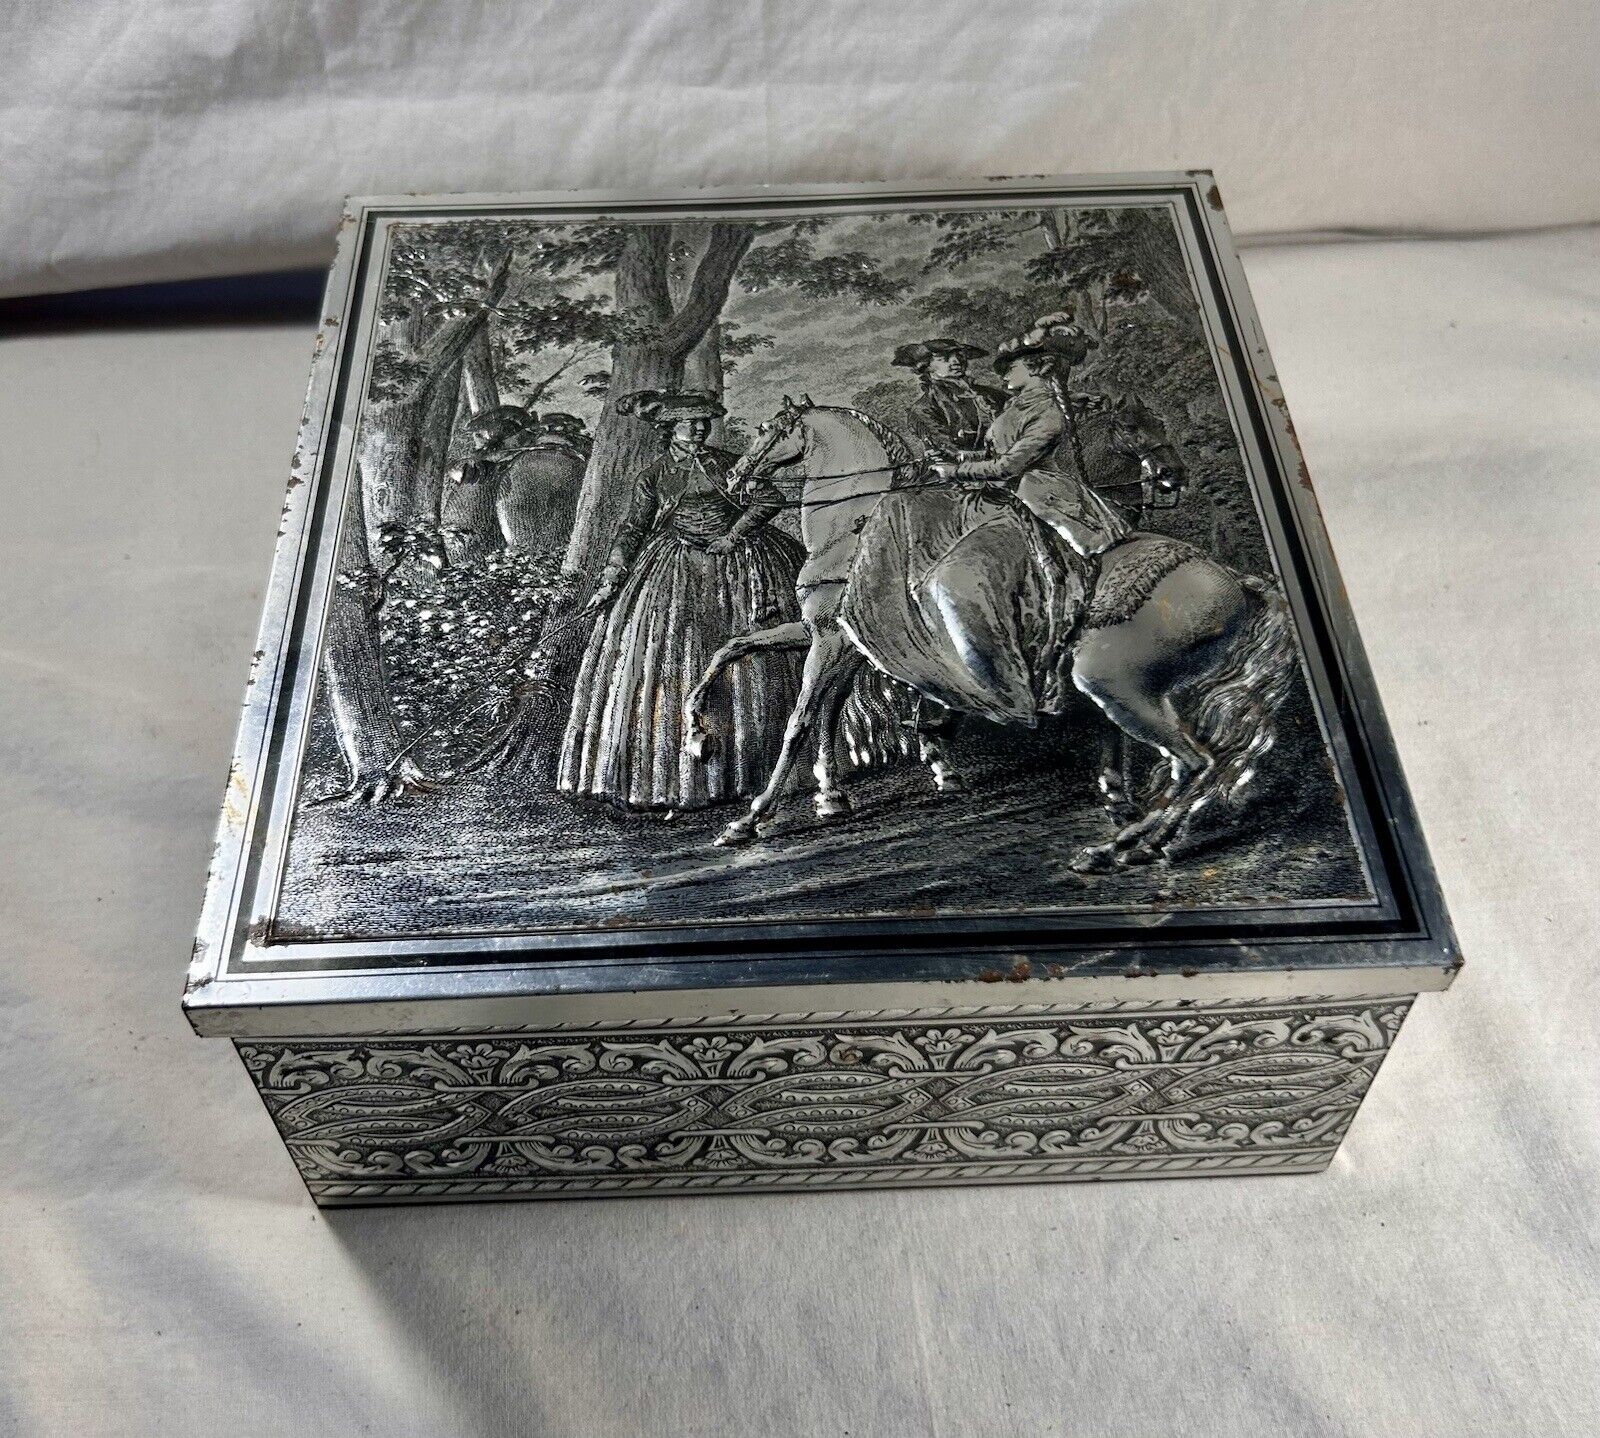 🚨Vintage Biscuit Cookie Tin Box Silver Colonial Woman Horse Riding Courting 